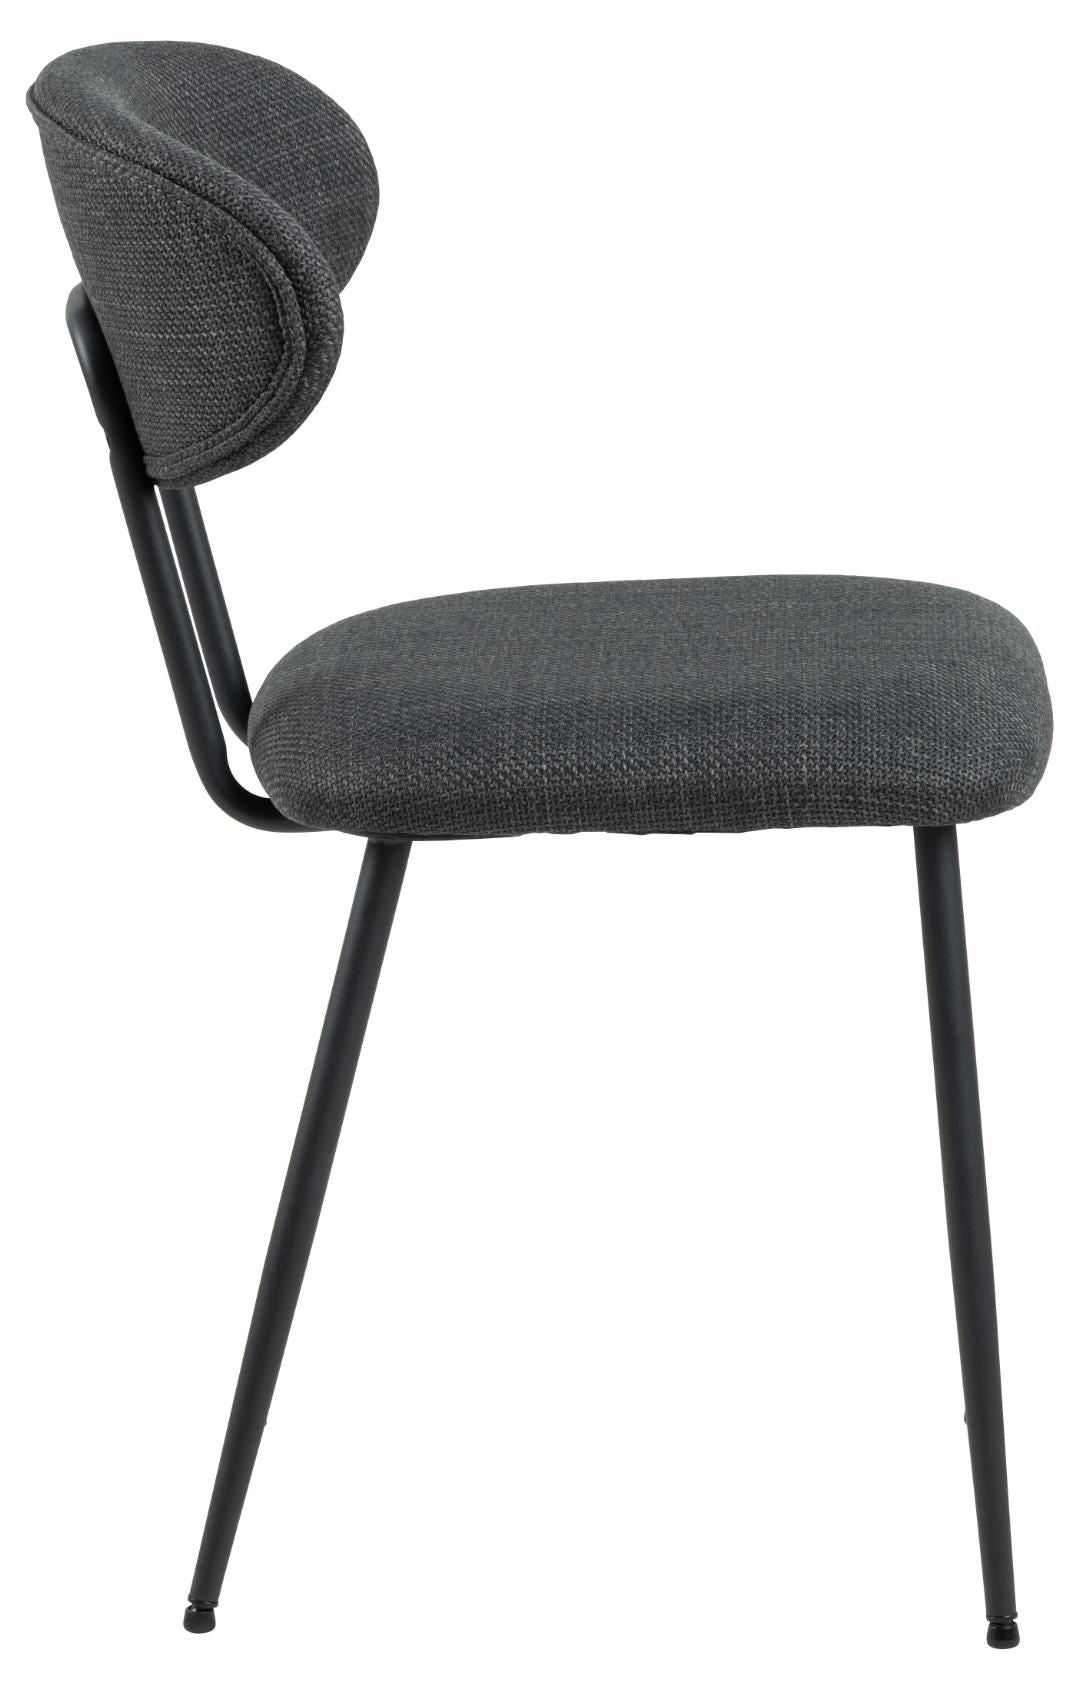 Denise dining chair